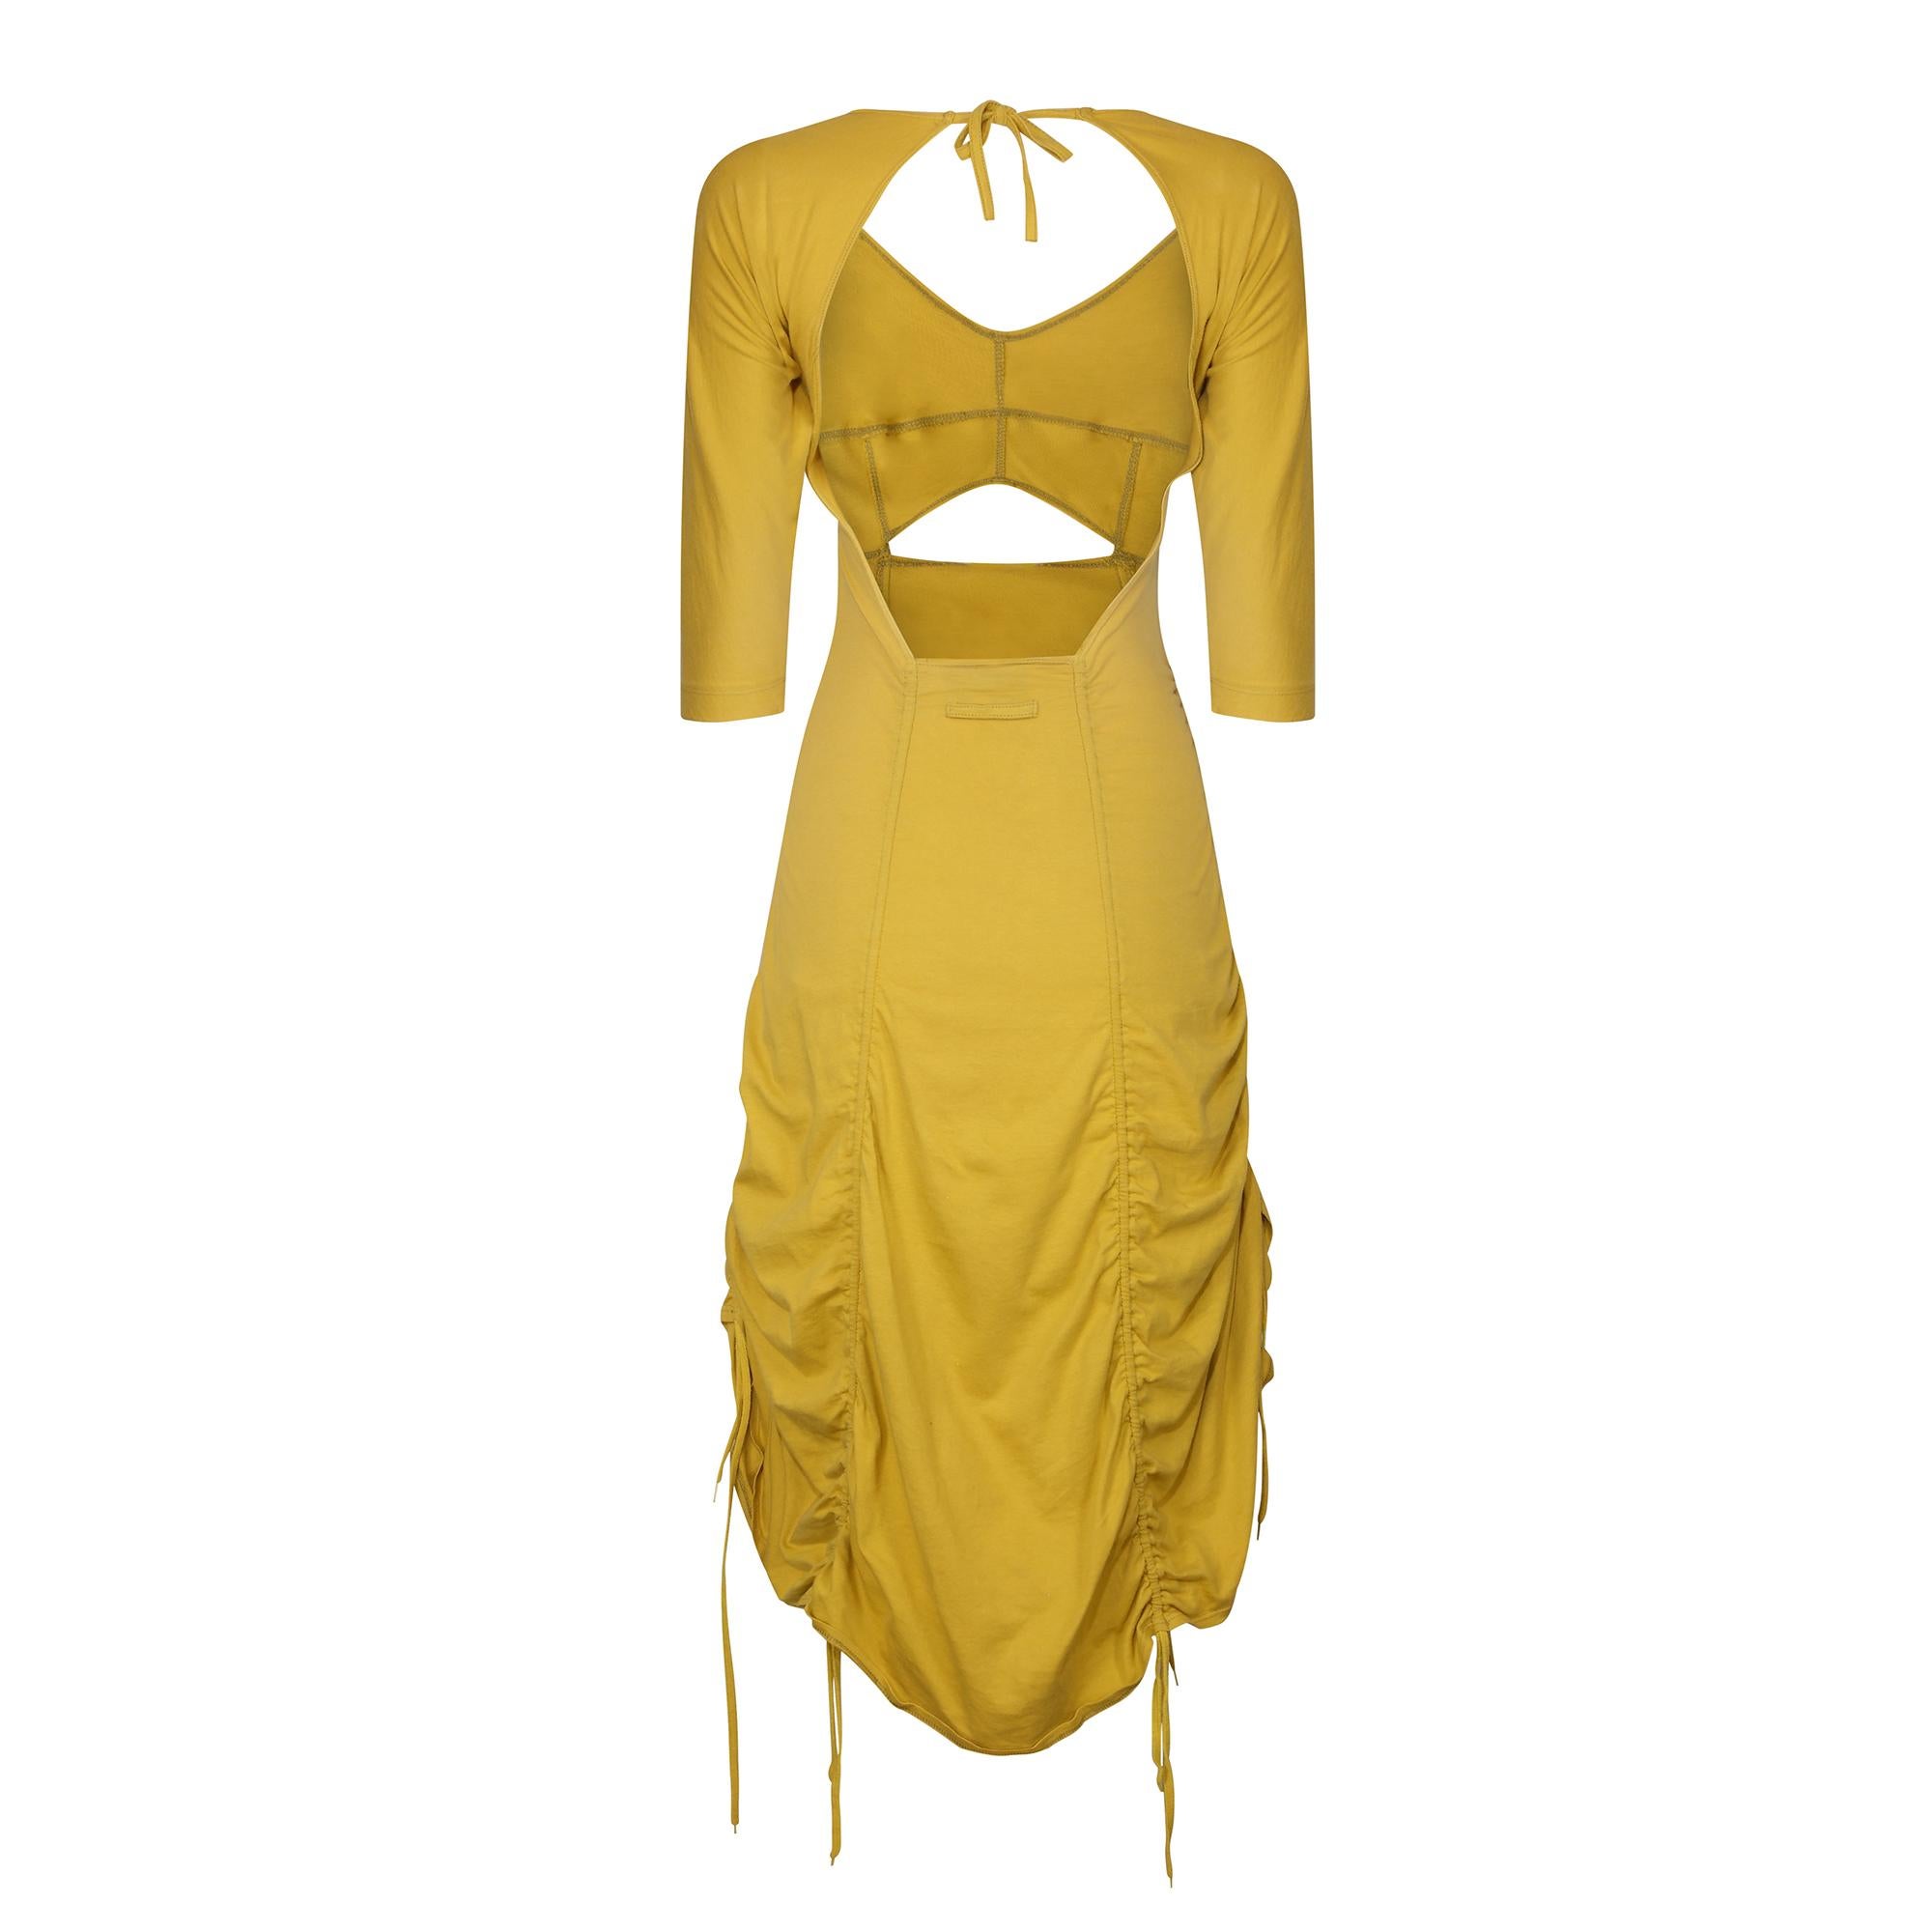 It is wonderful to be able to attribute this piece to a runway show and this dress is from the Jean Paul Gaultier ready to wear spring summer 1991 collection. It is made from a mustard yellow cotton stretch jersey with the ruched element of the